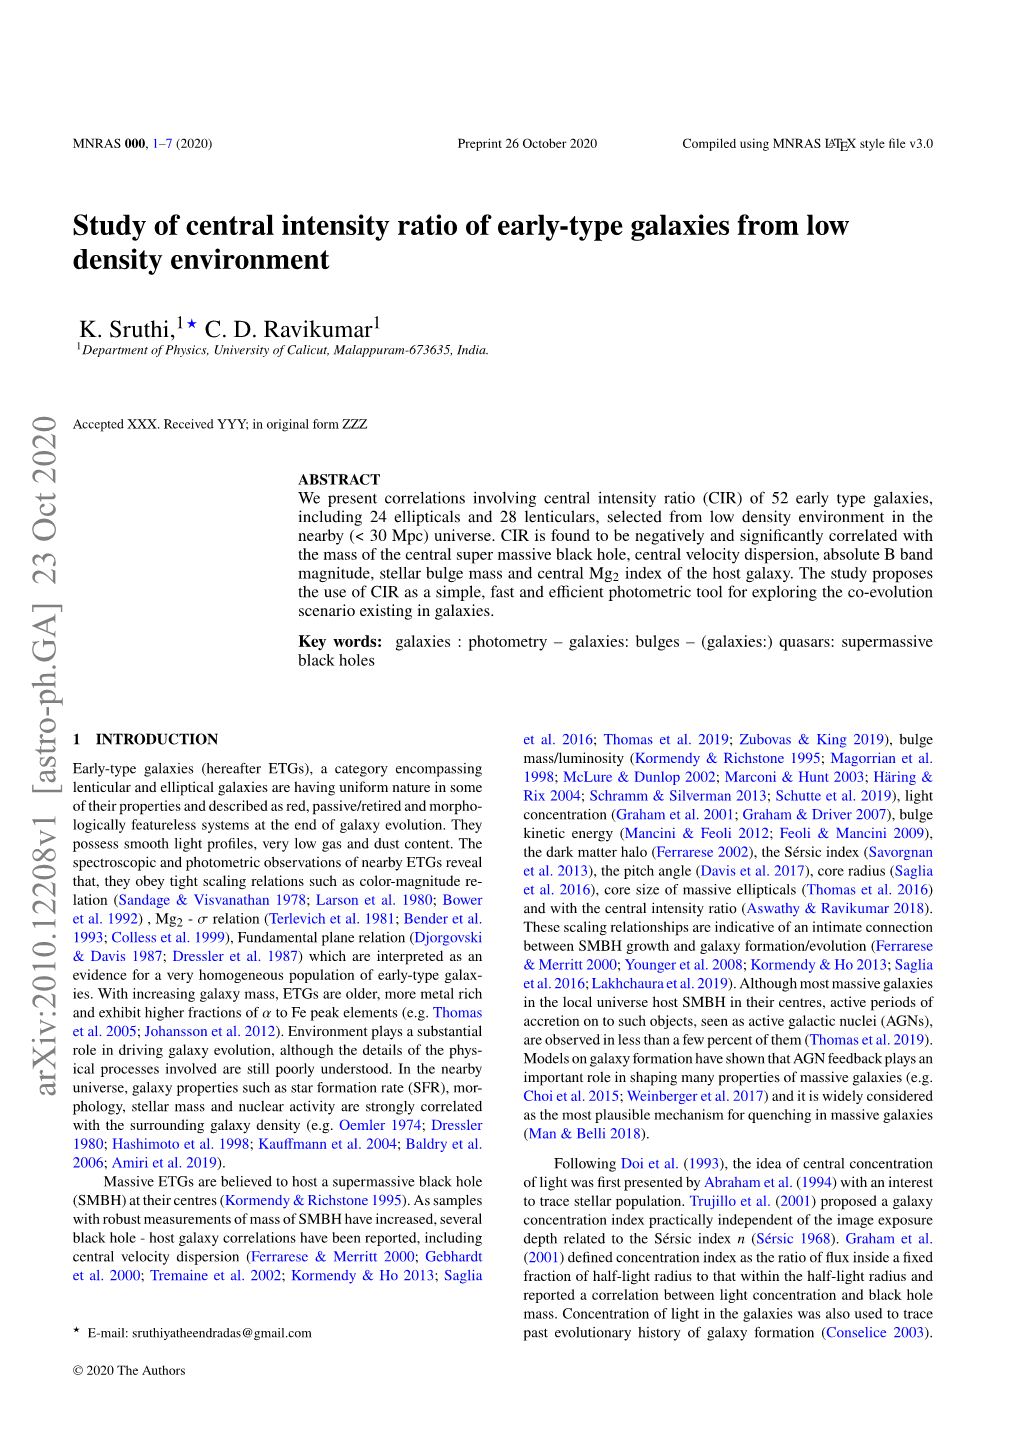 Study of Central Intensity Ratio of Early-Type Galaxies from Low Density Environment